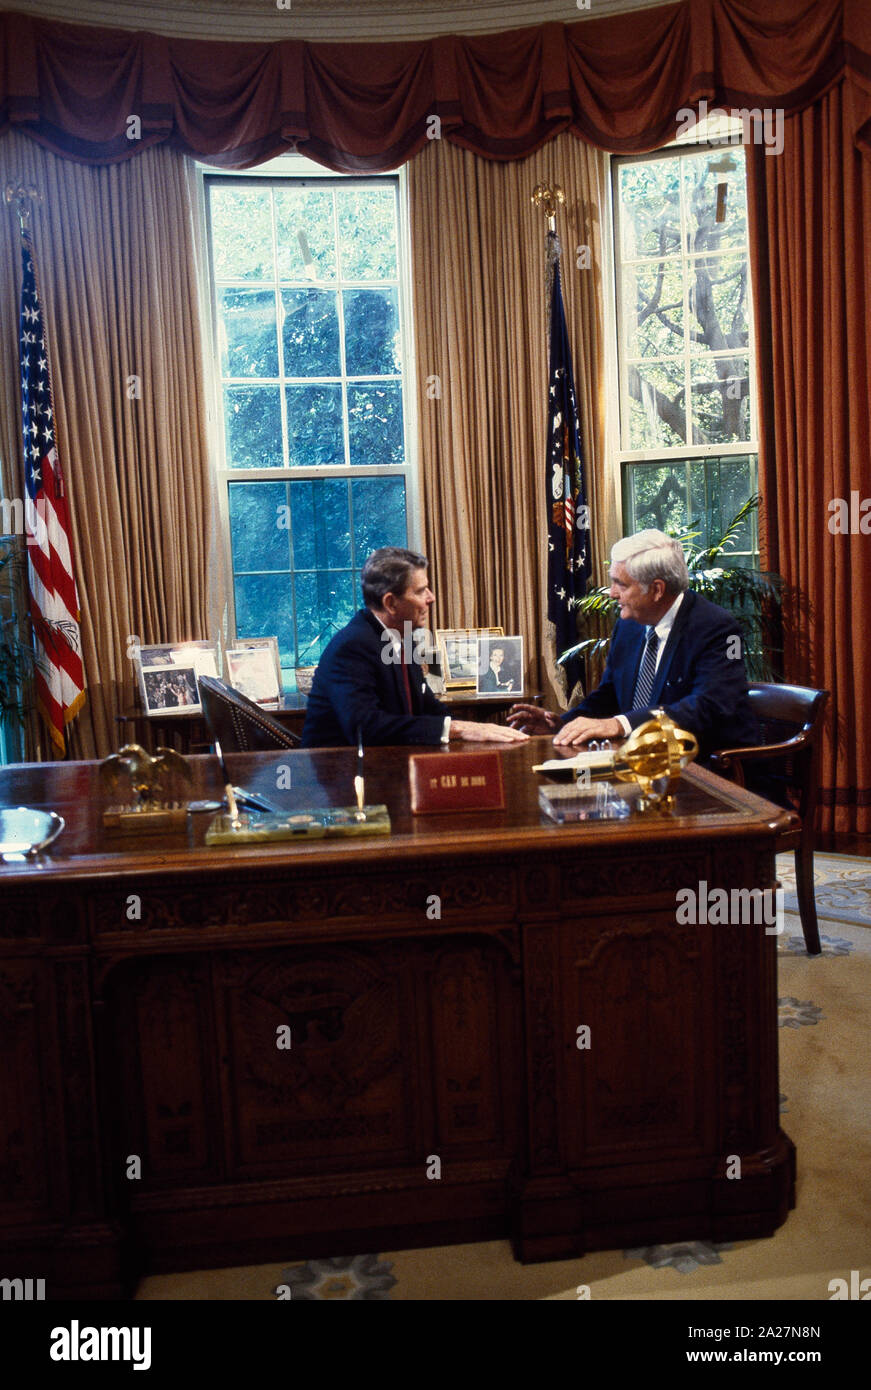 President Ronald Reagan talks to Republican Senators at his desk in the Oval Office of the White House, Washington, D.C Stock Photo